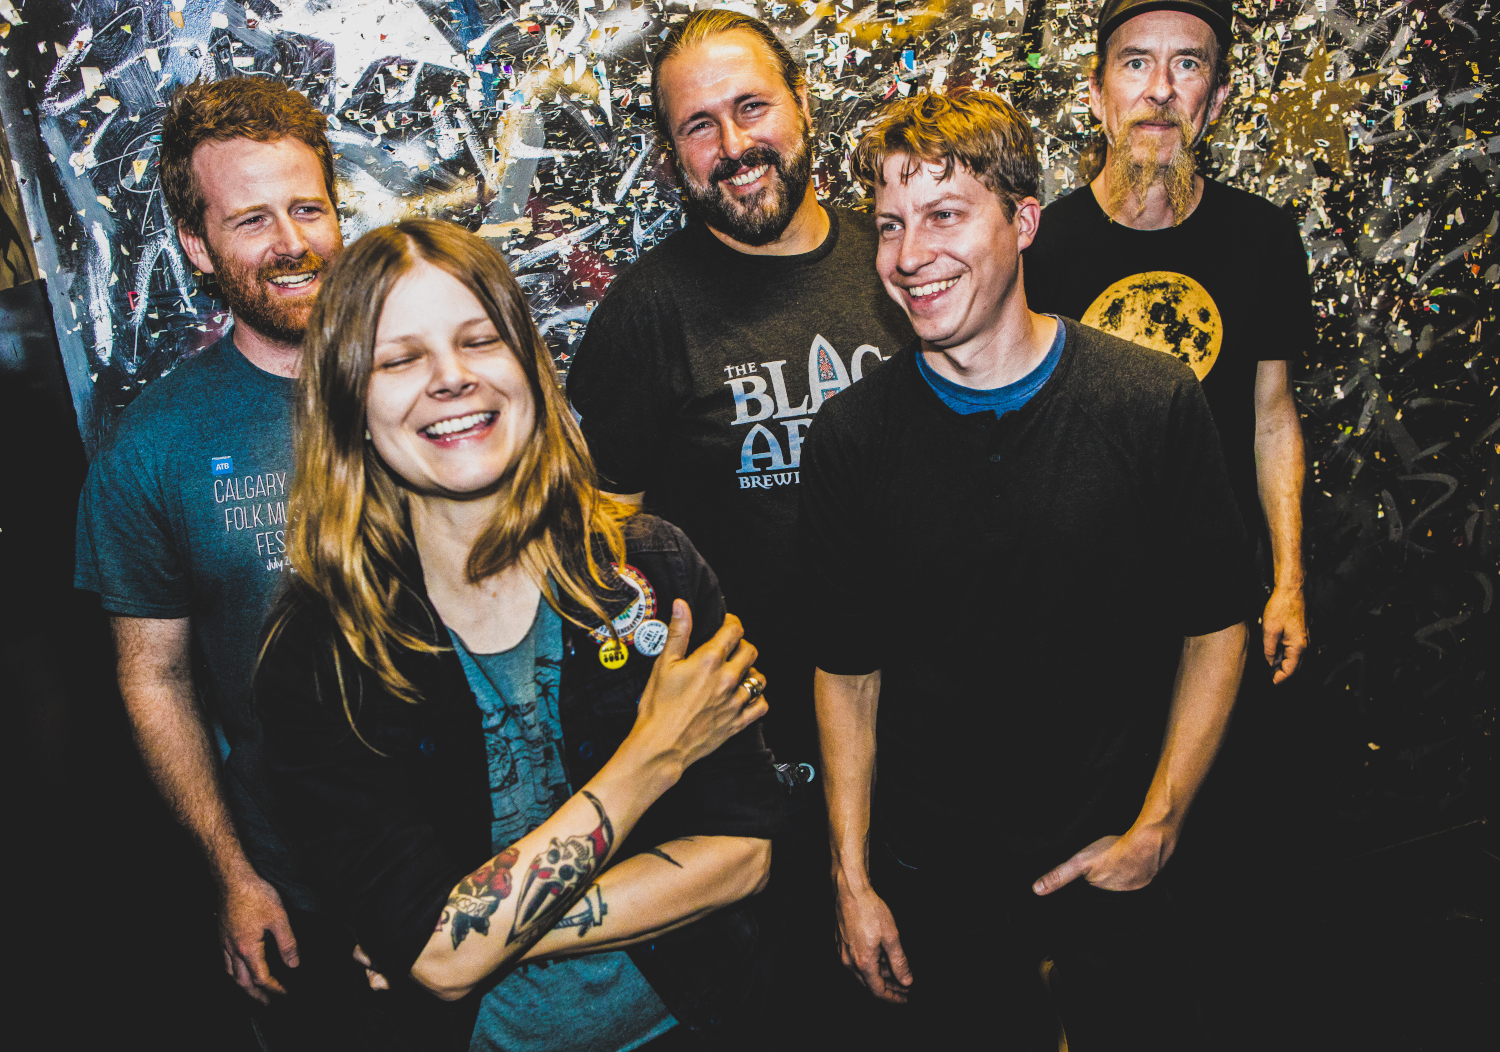 Sarah Shook & The Disarmers announce tour dates around the Long Road Festival